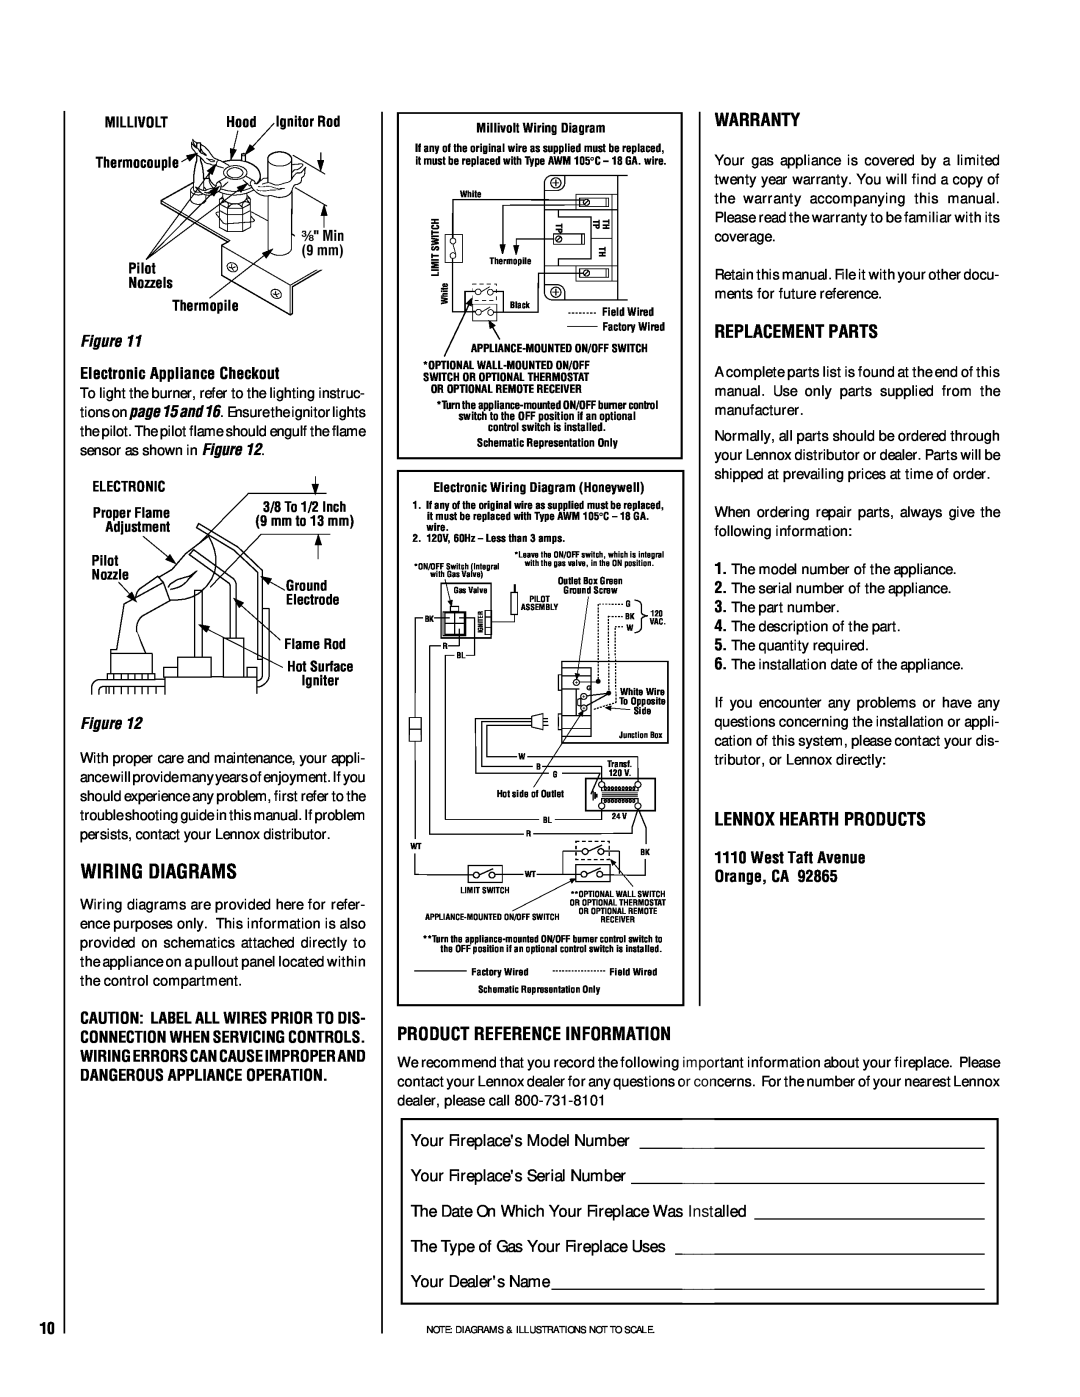 Lennox Hearth EBSTPM-2 Wiring Diagrams, Warranty, Replacement Parts, Lennox Hearth Products, Product Reference Information 